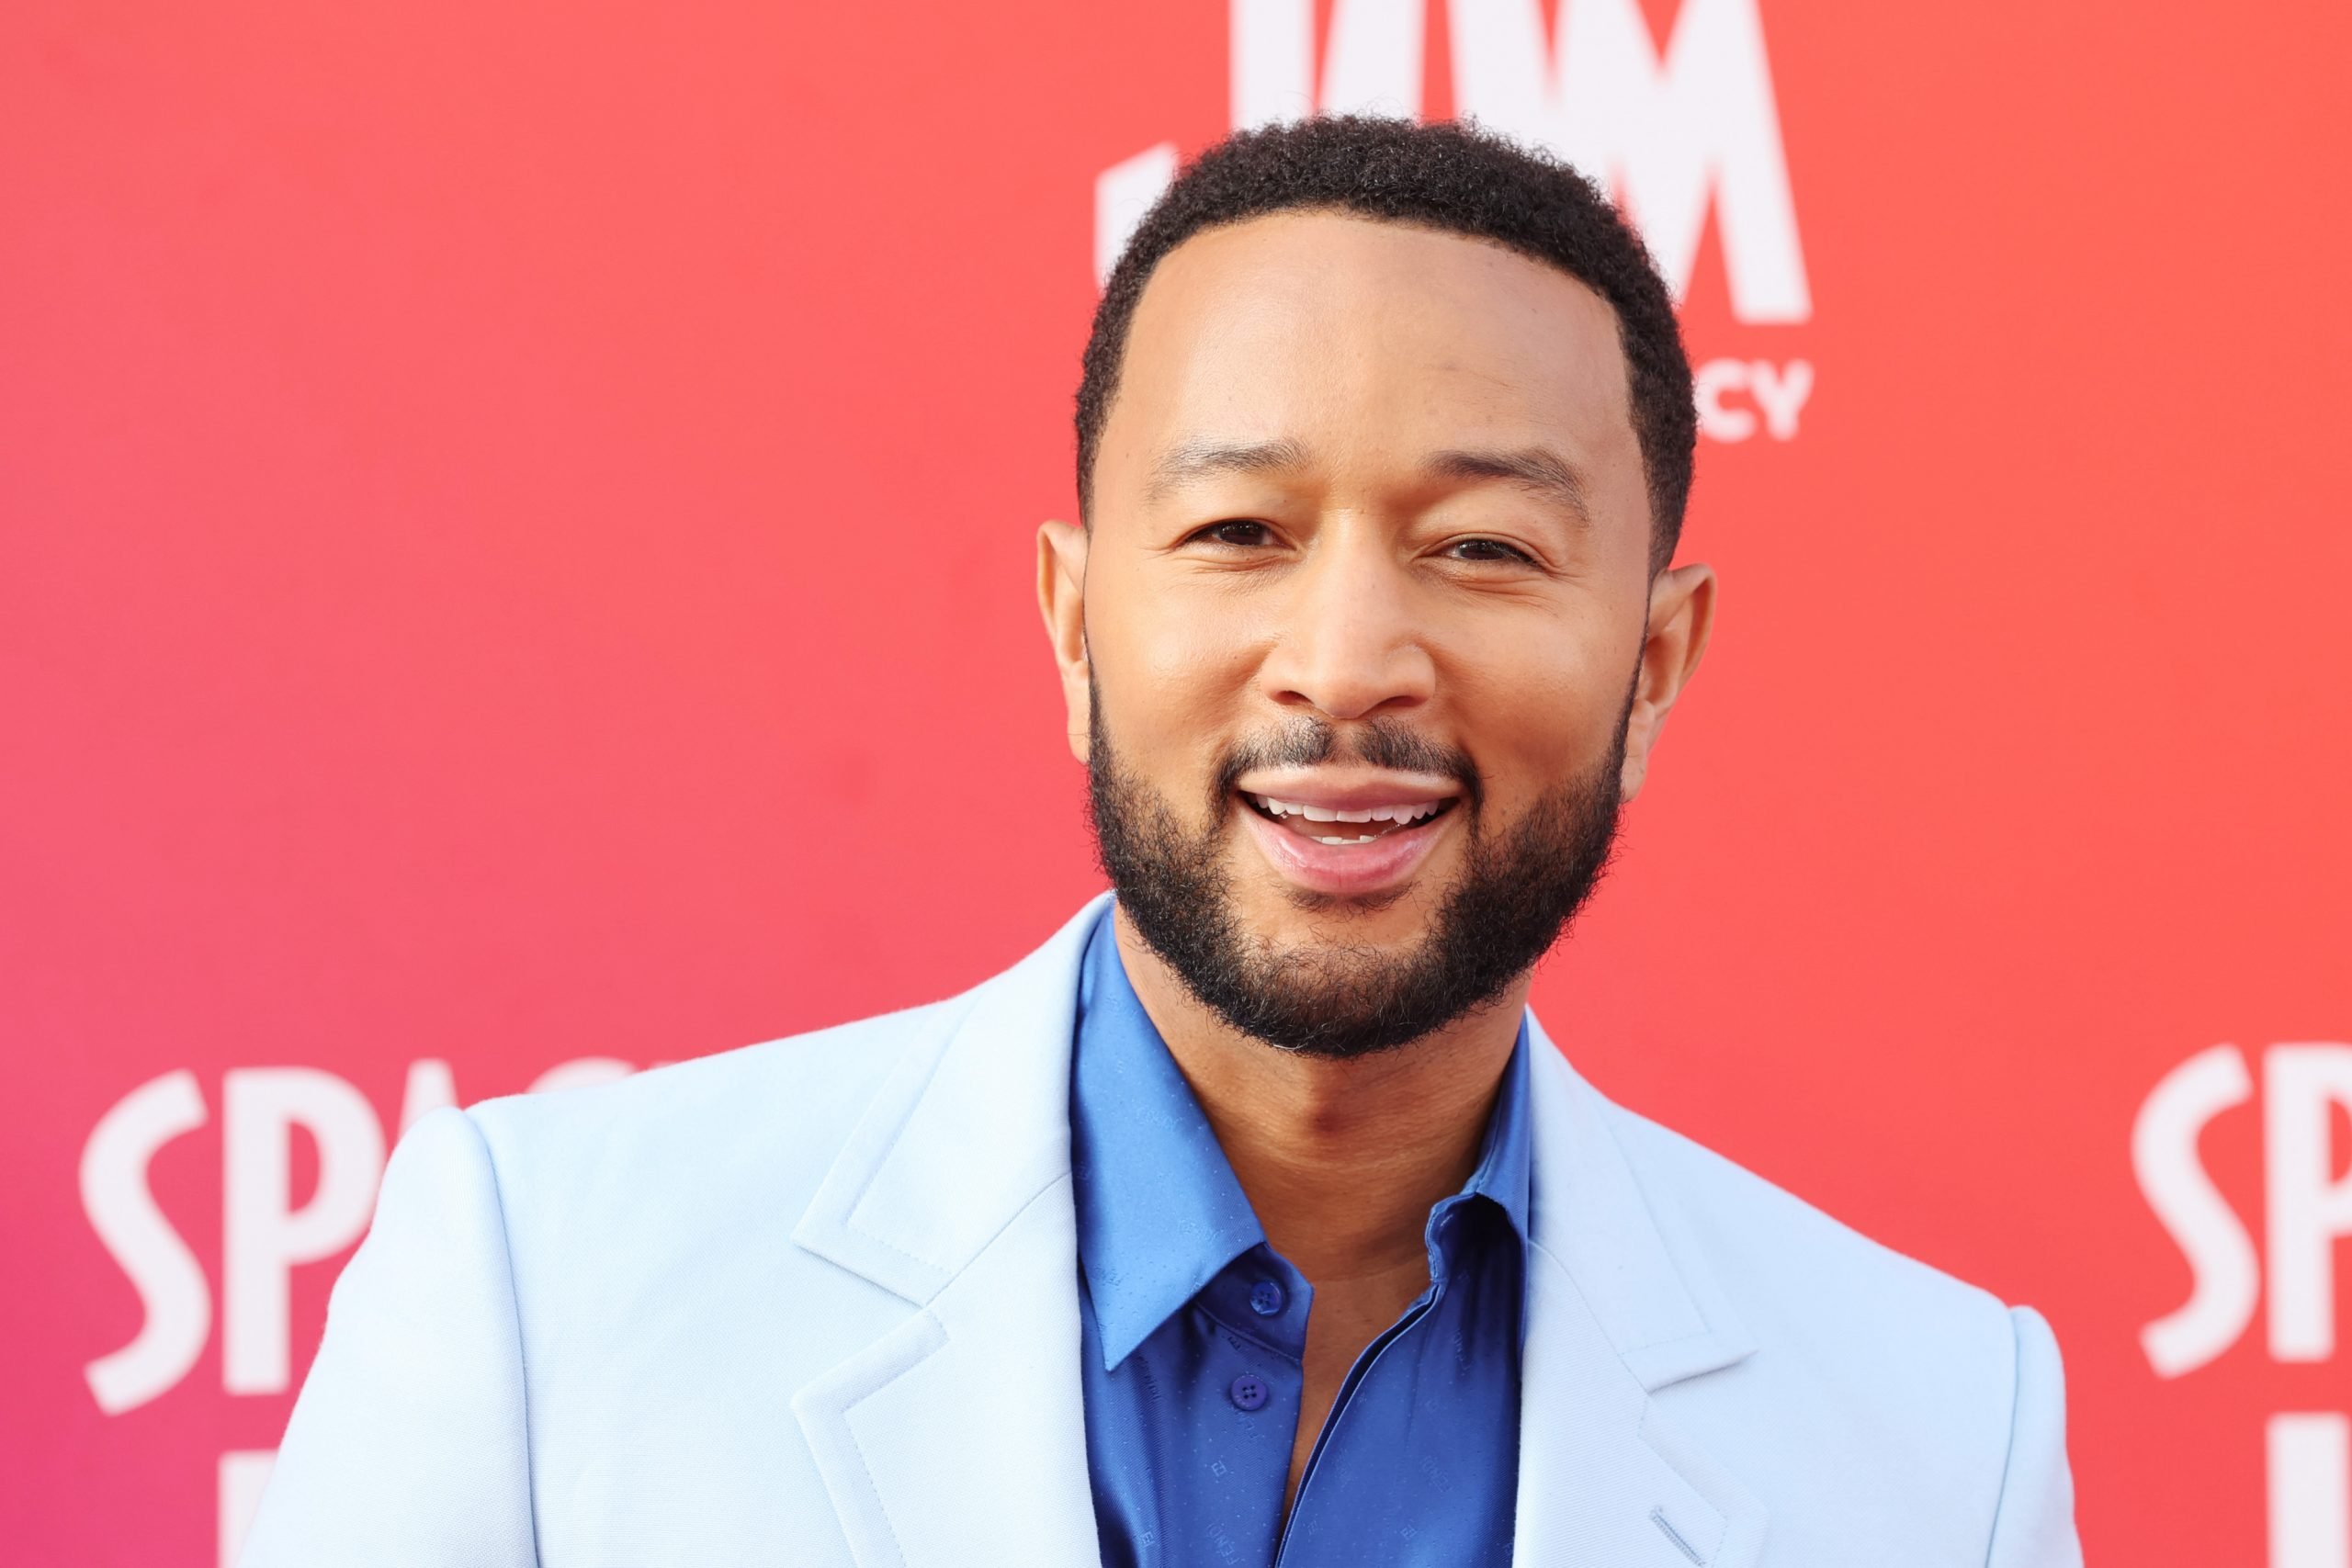 John Legend Just Joined The Temptations’ Hit Broadway Musical ‘Ain’t Too Proud’